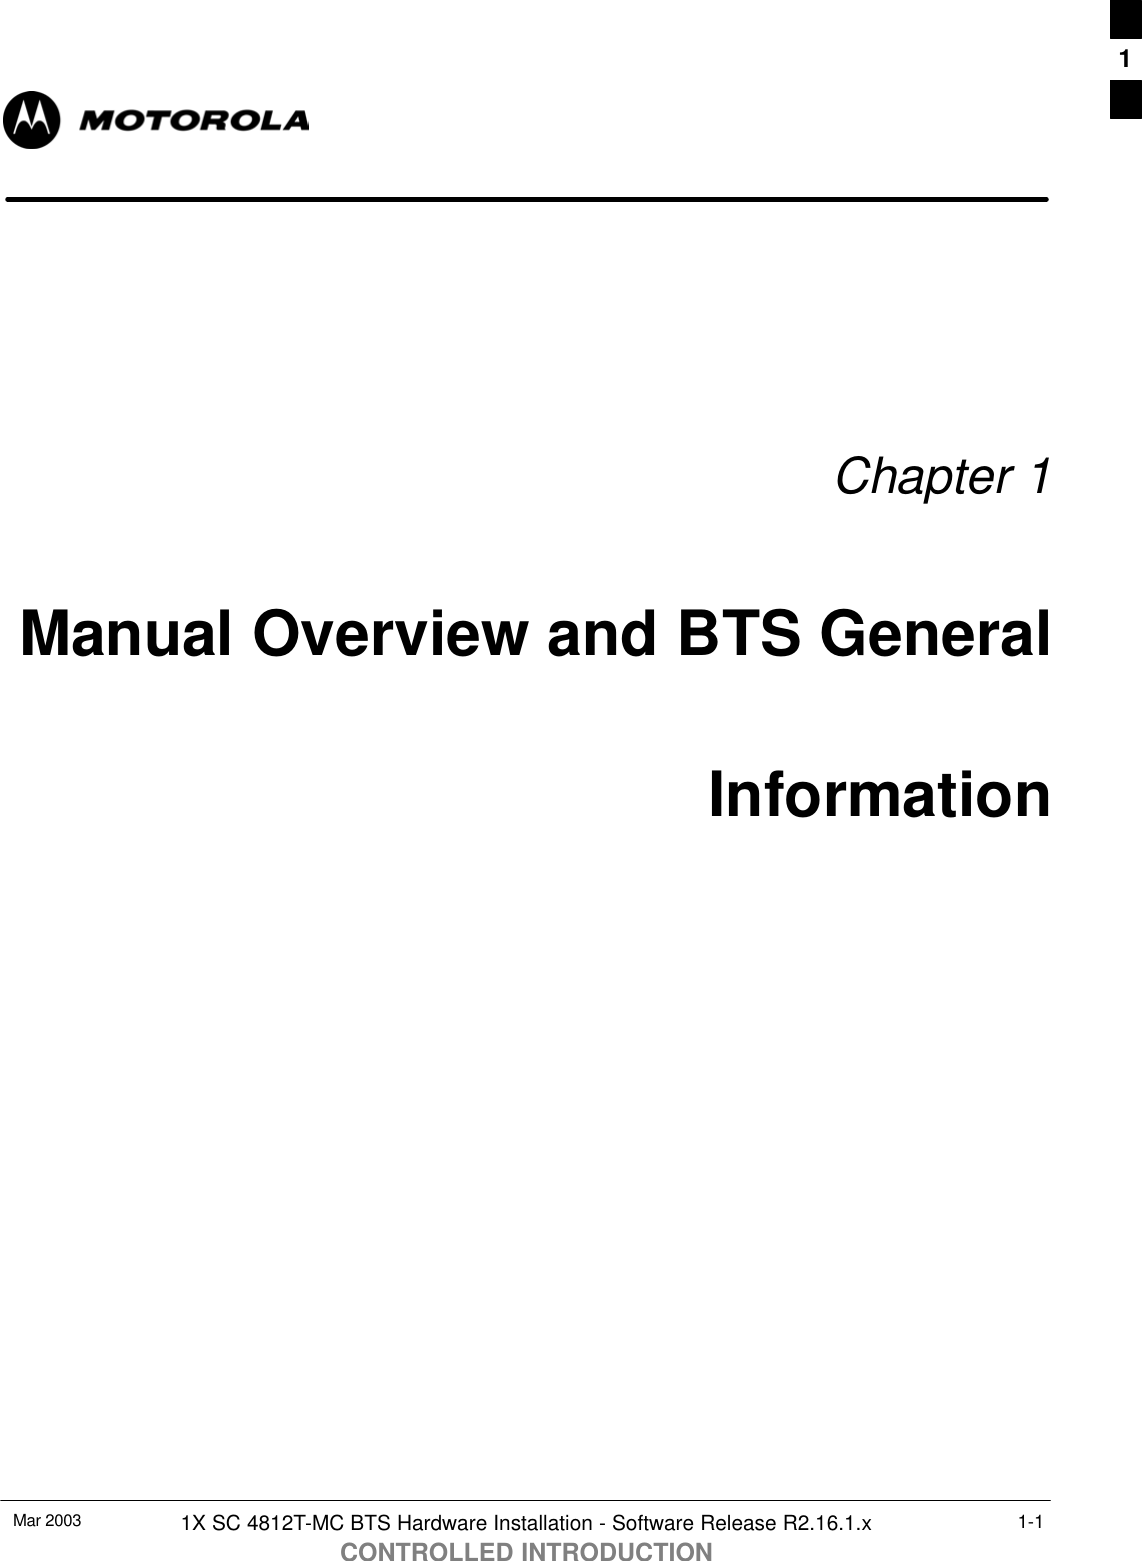 Mar 2003 1X SC 4812T-MC BTS Hardware Installation - Software Release R2.16.1.xCONTROLLED INTRODUCTION1-1Chapter 1Manual Overview and BTS GeneralInformation1